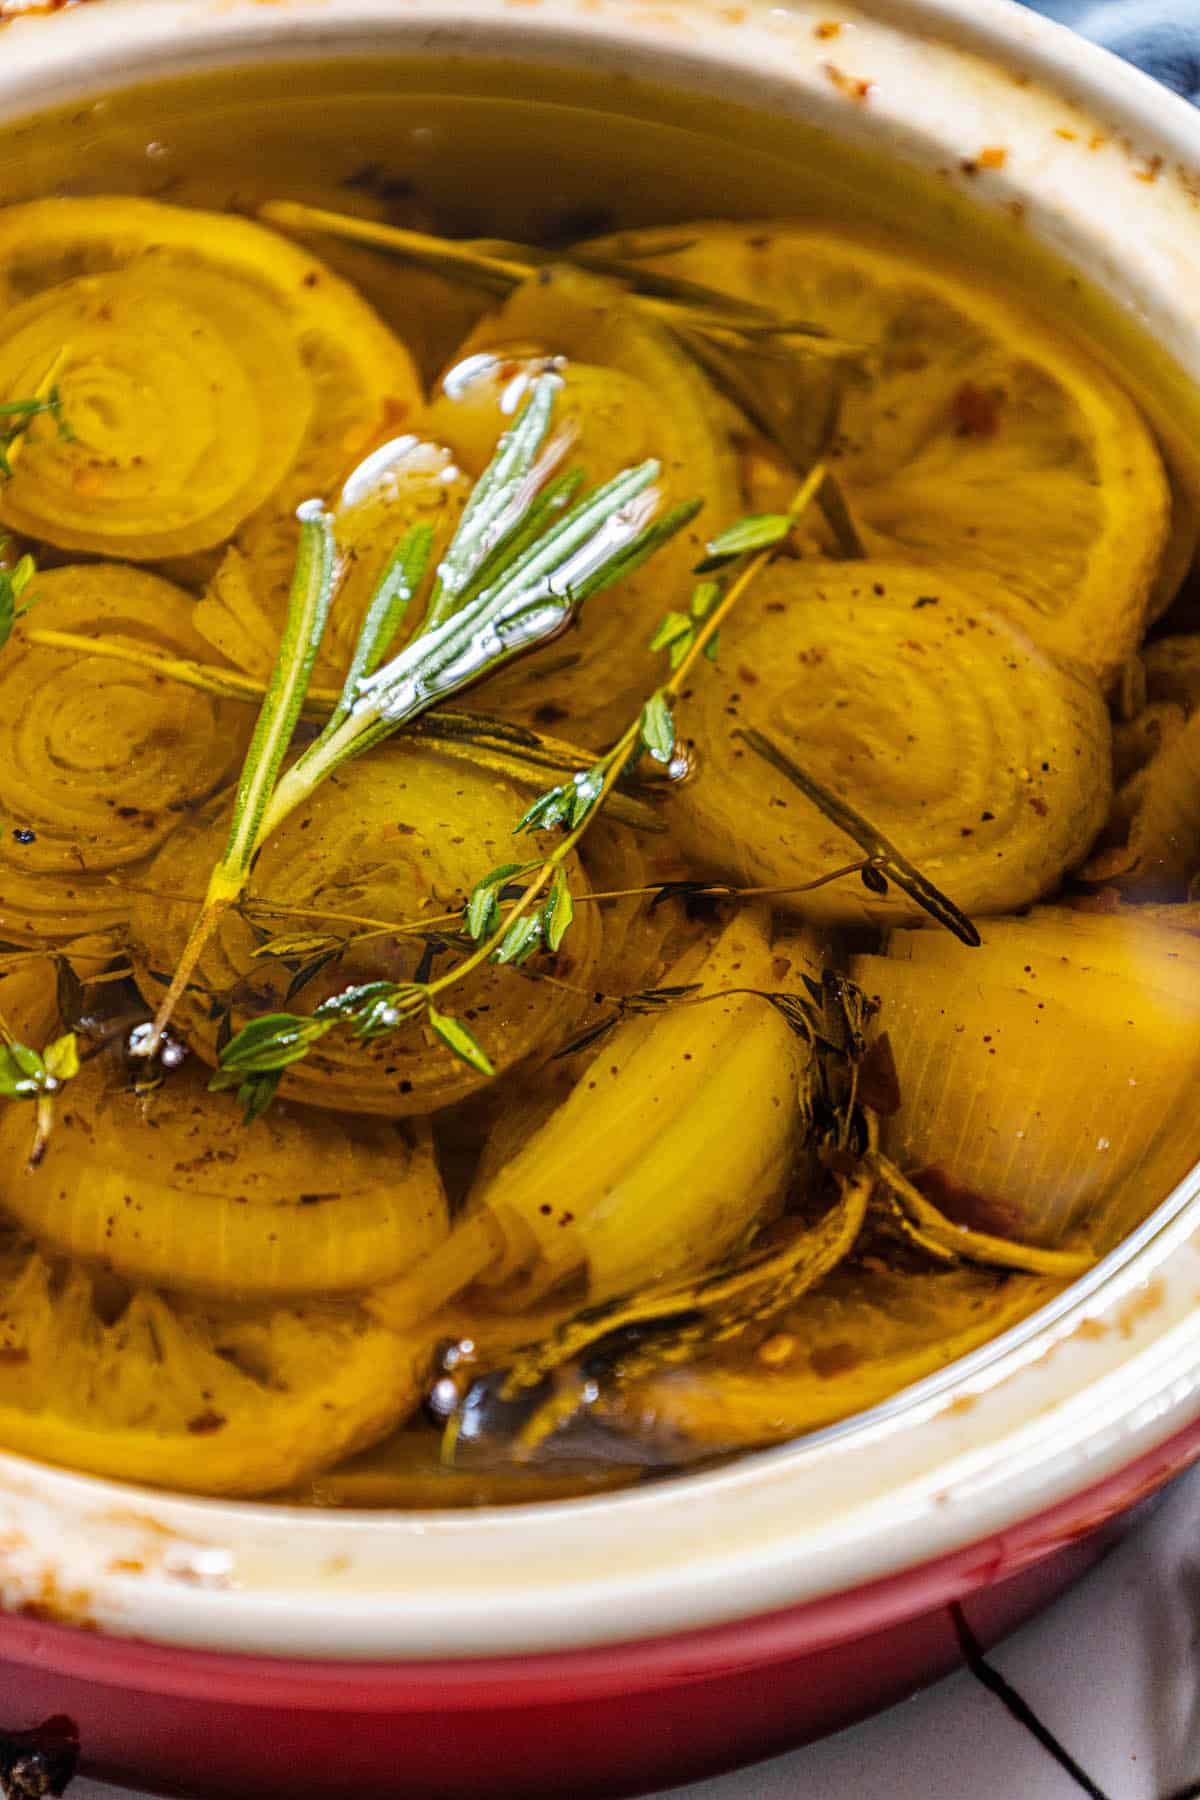 A bowl of confit onions with a sprig of rosemary.